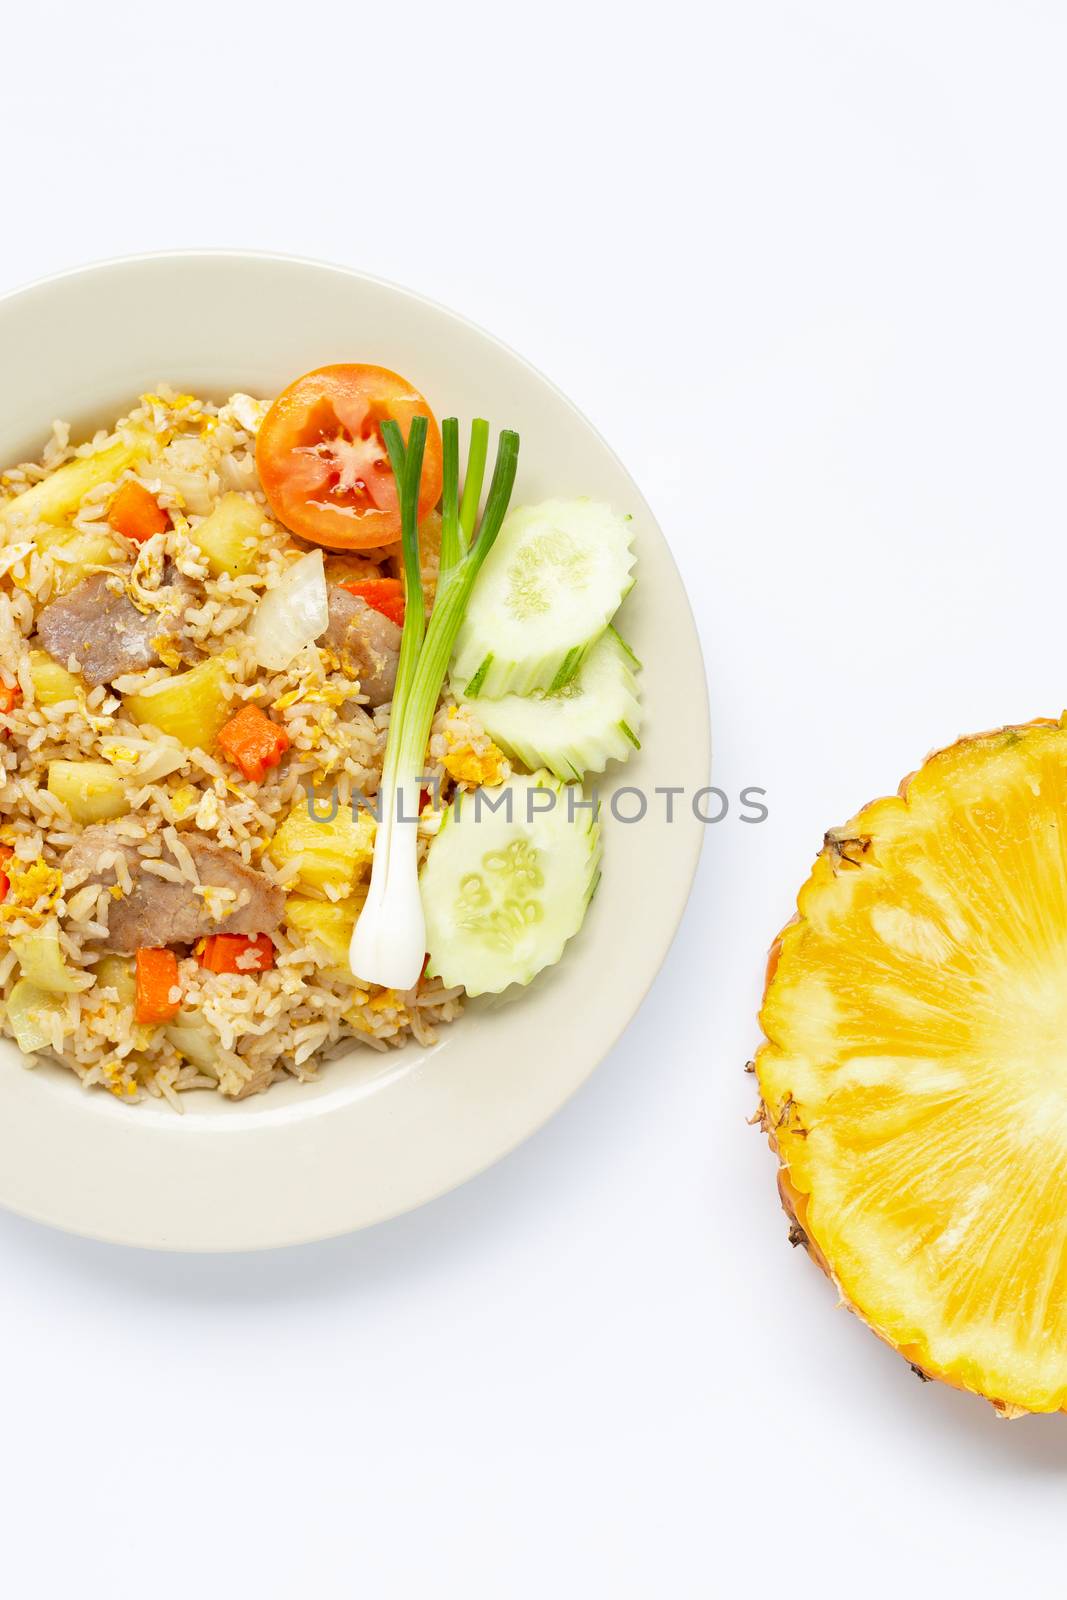 Pineapple fried rice with fresh pineapple slice on white  by Bowonpat